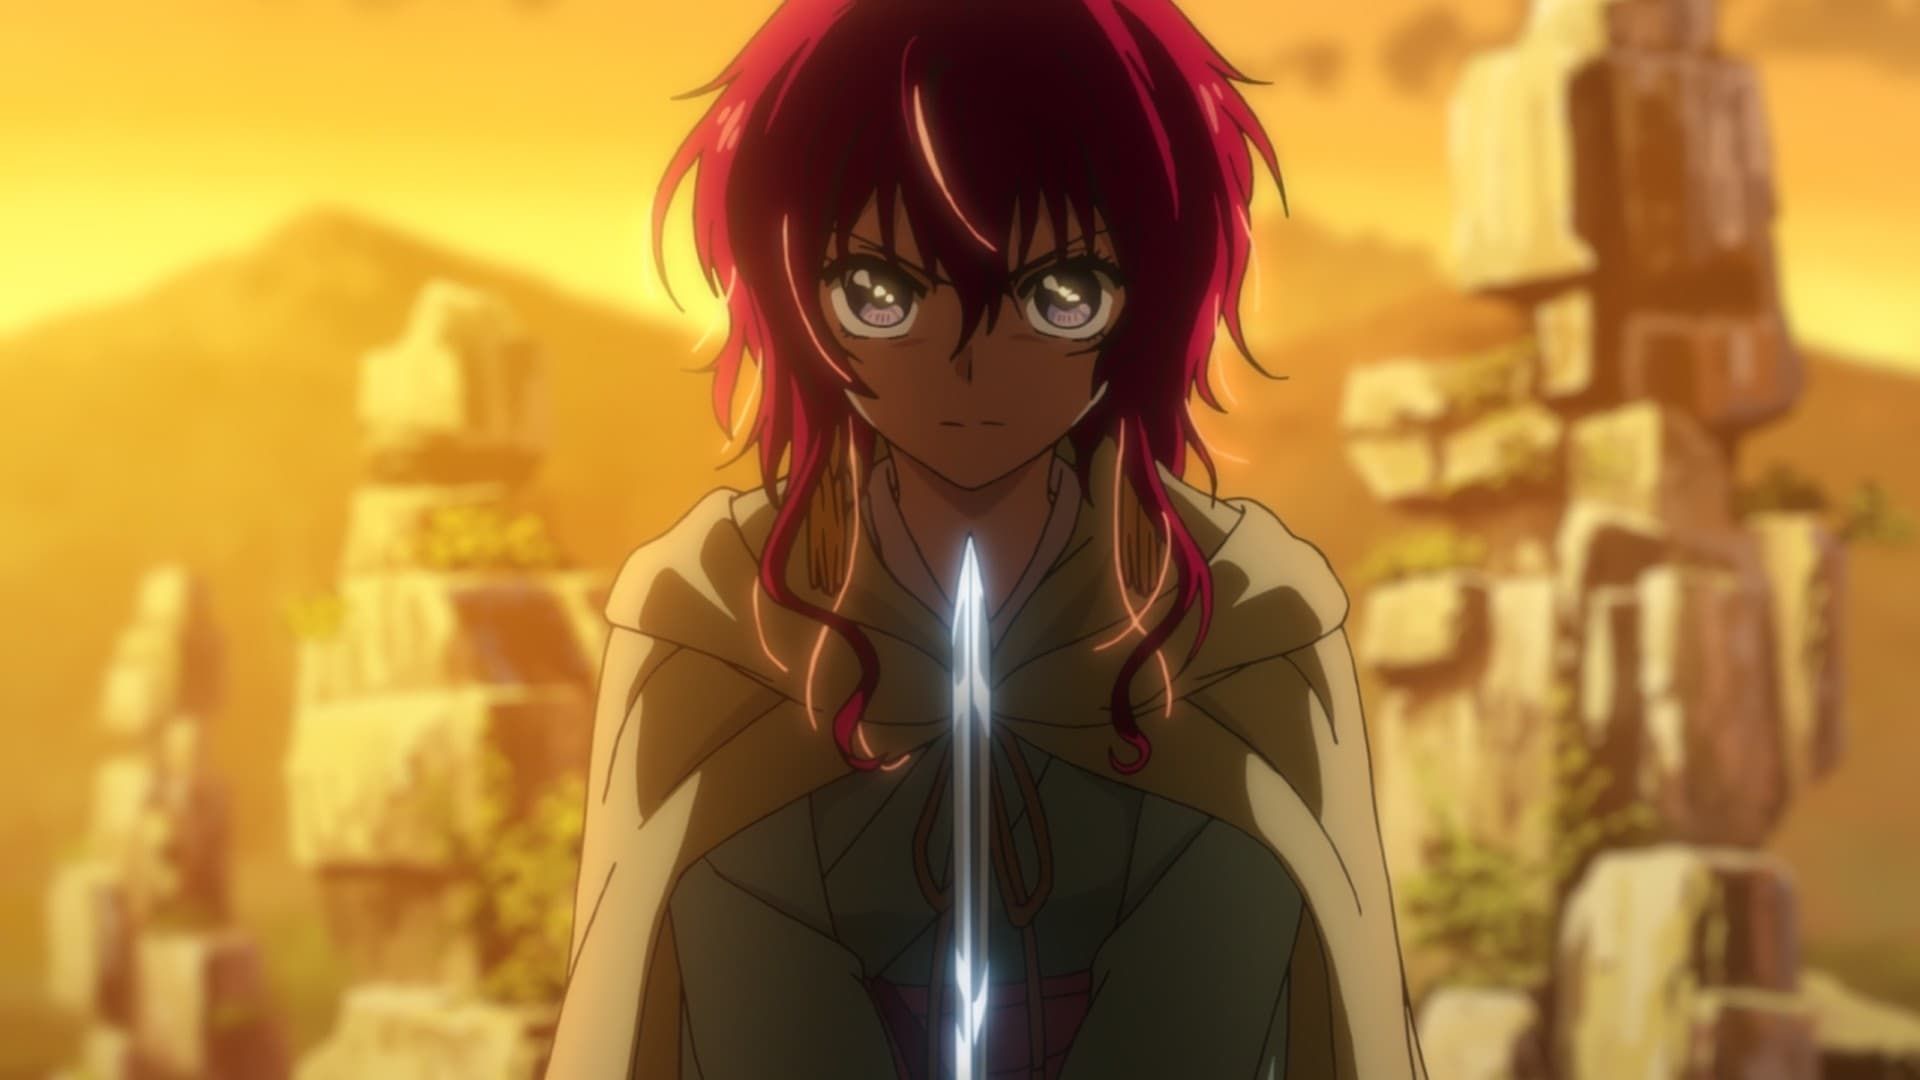 Yona of the Dawn background